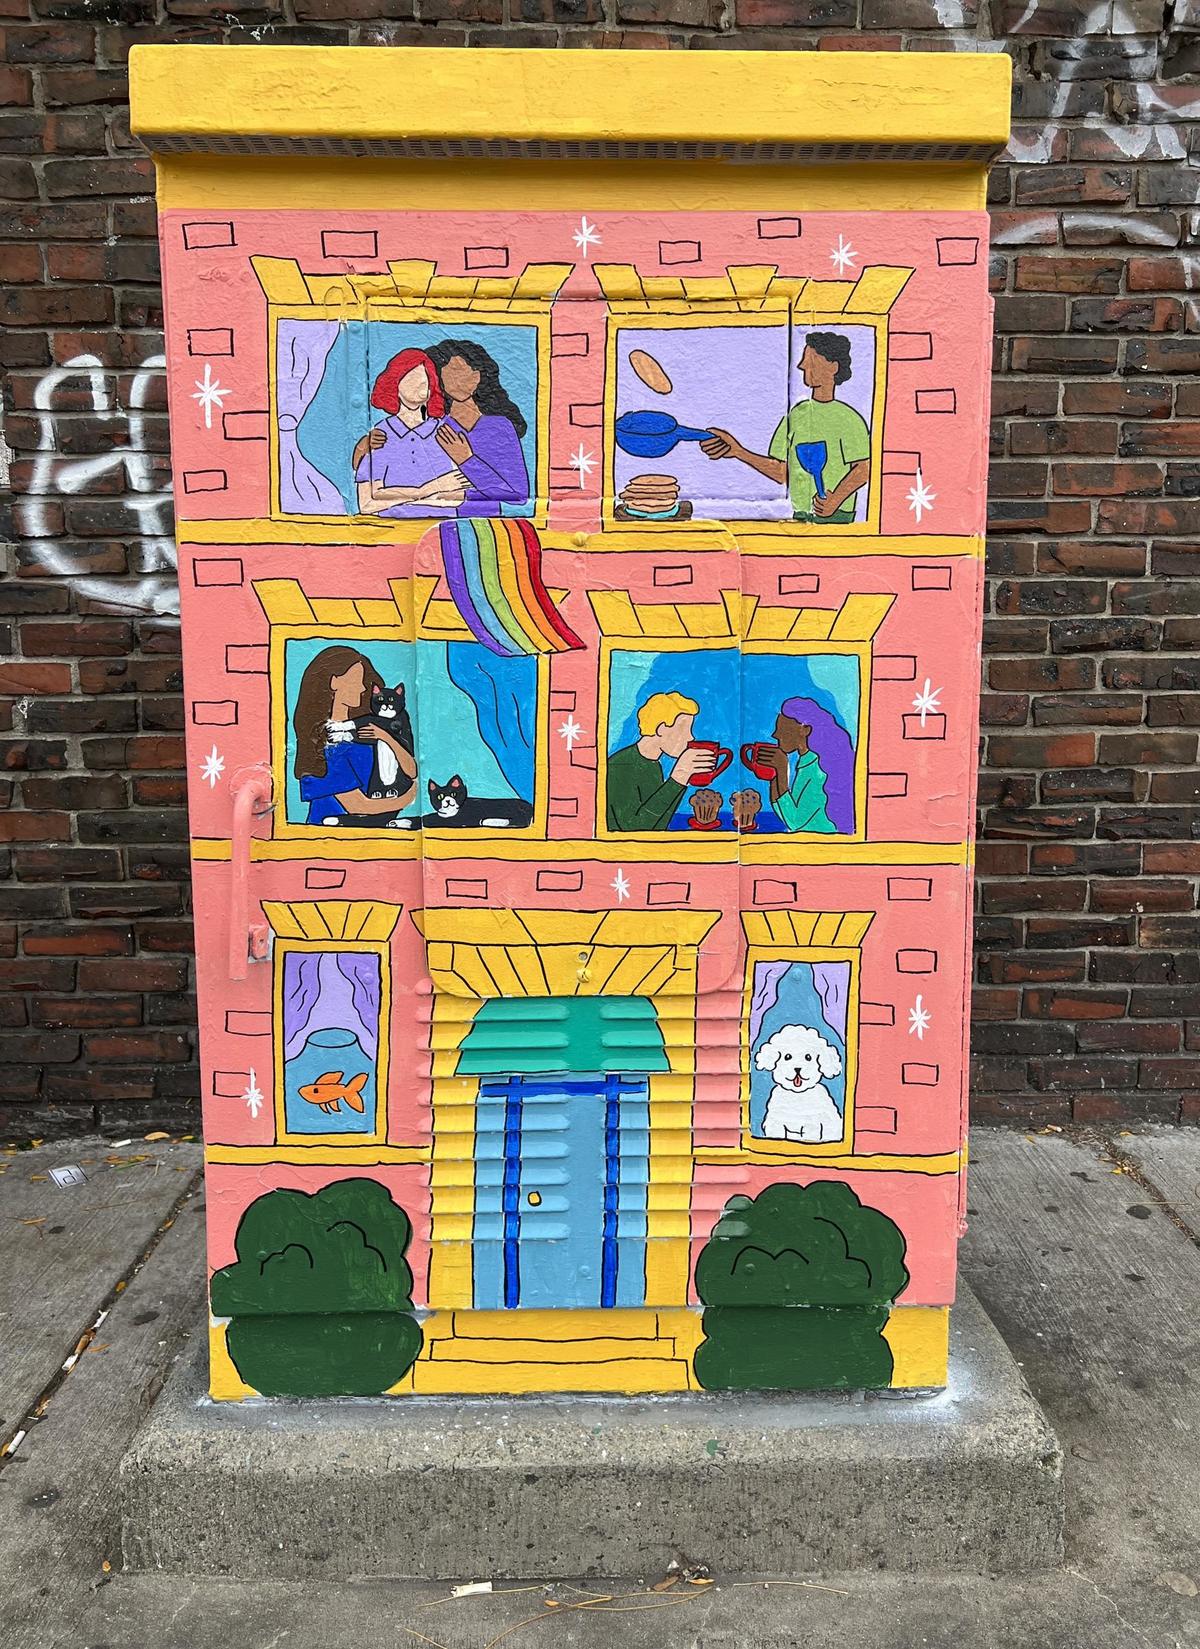 Utility box painted to look like a brightly colored building with happy people together in the windows